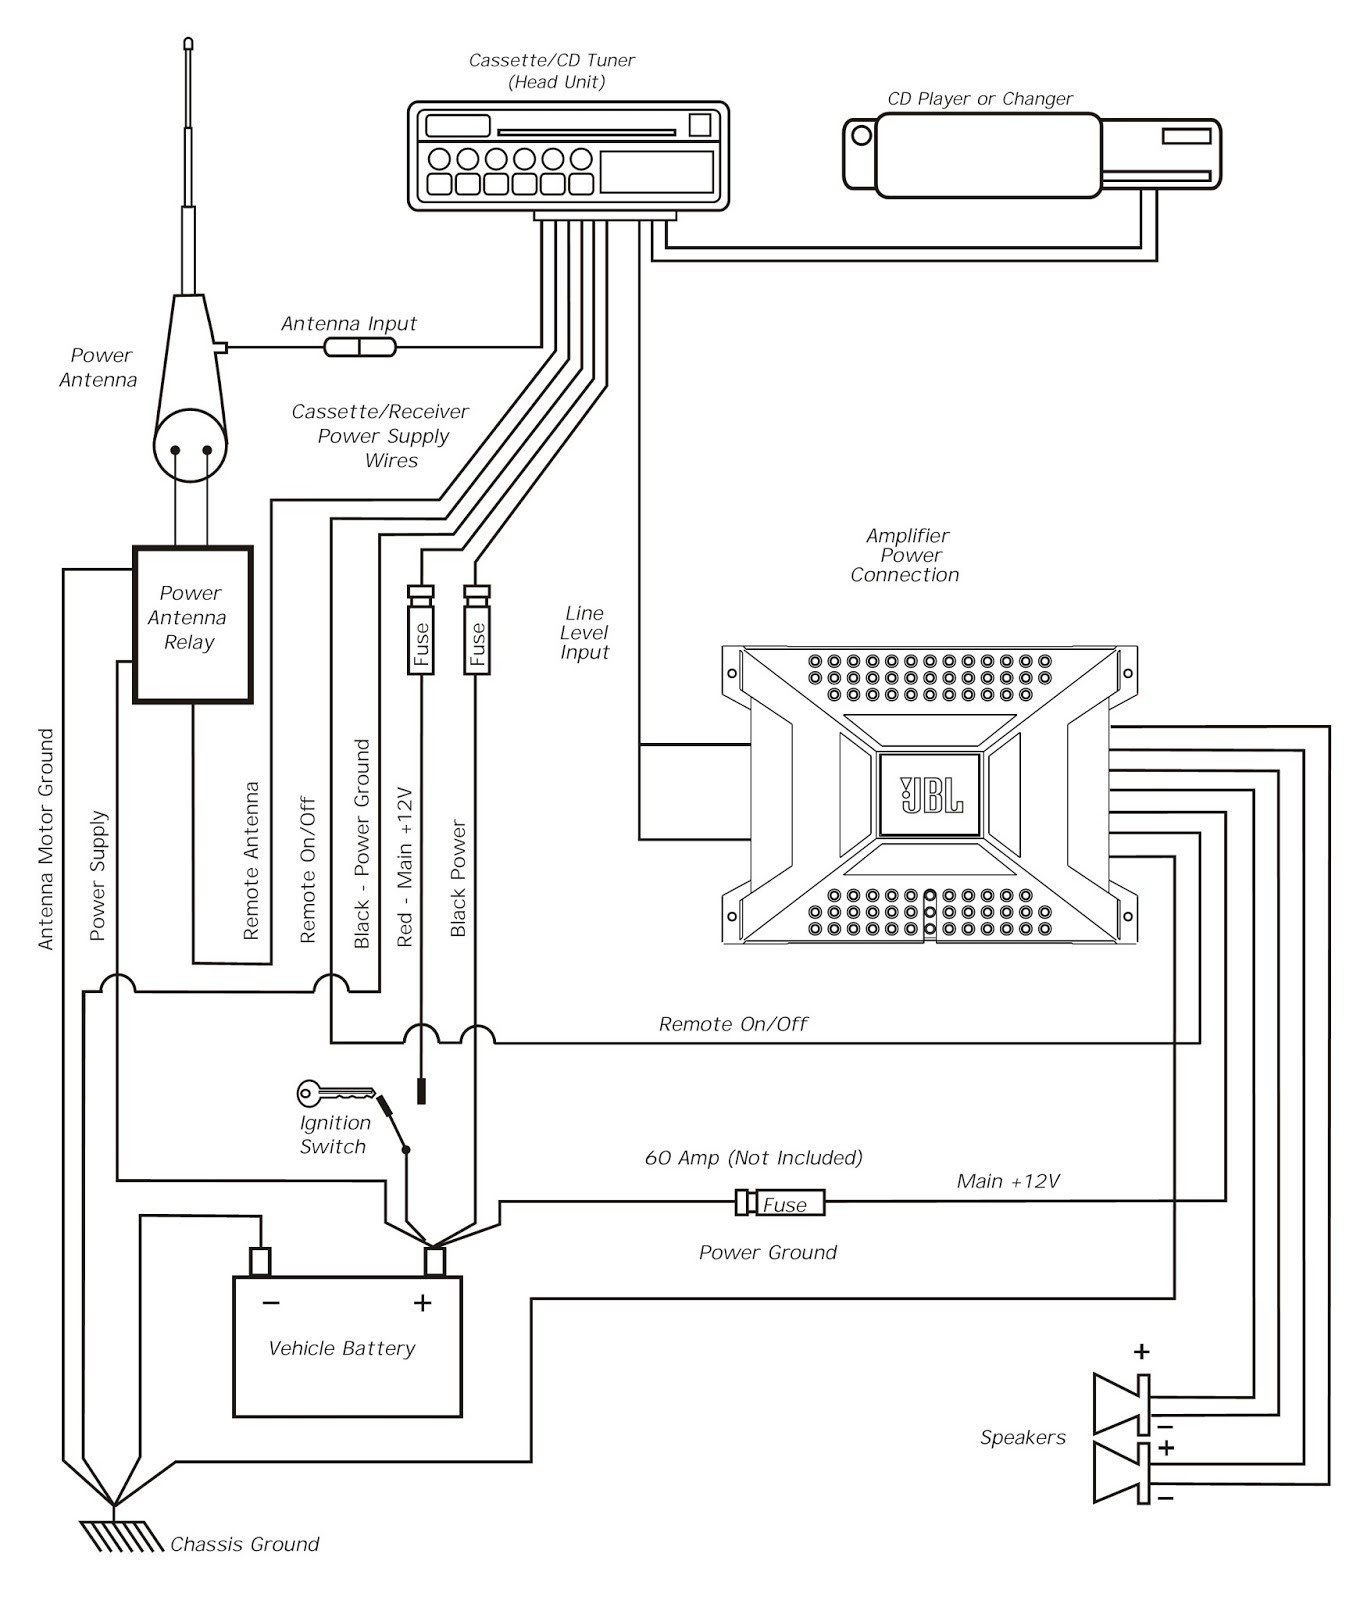 2007 Cadillac Dts Amp And Sub Wiring Diagram from lh6.googleusercontent.com